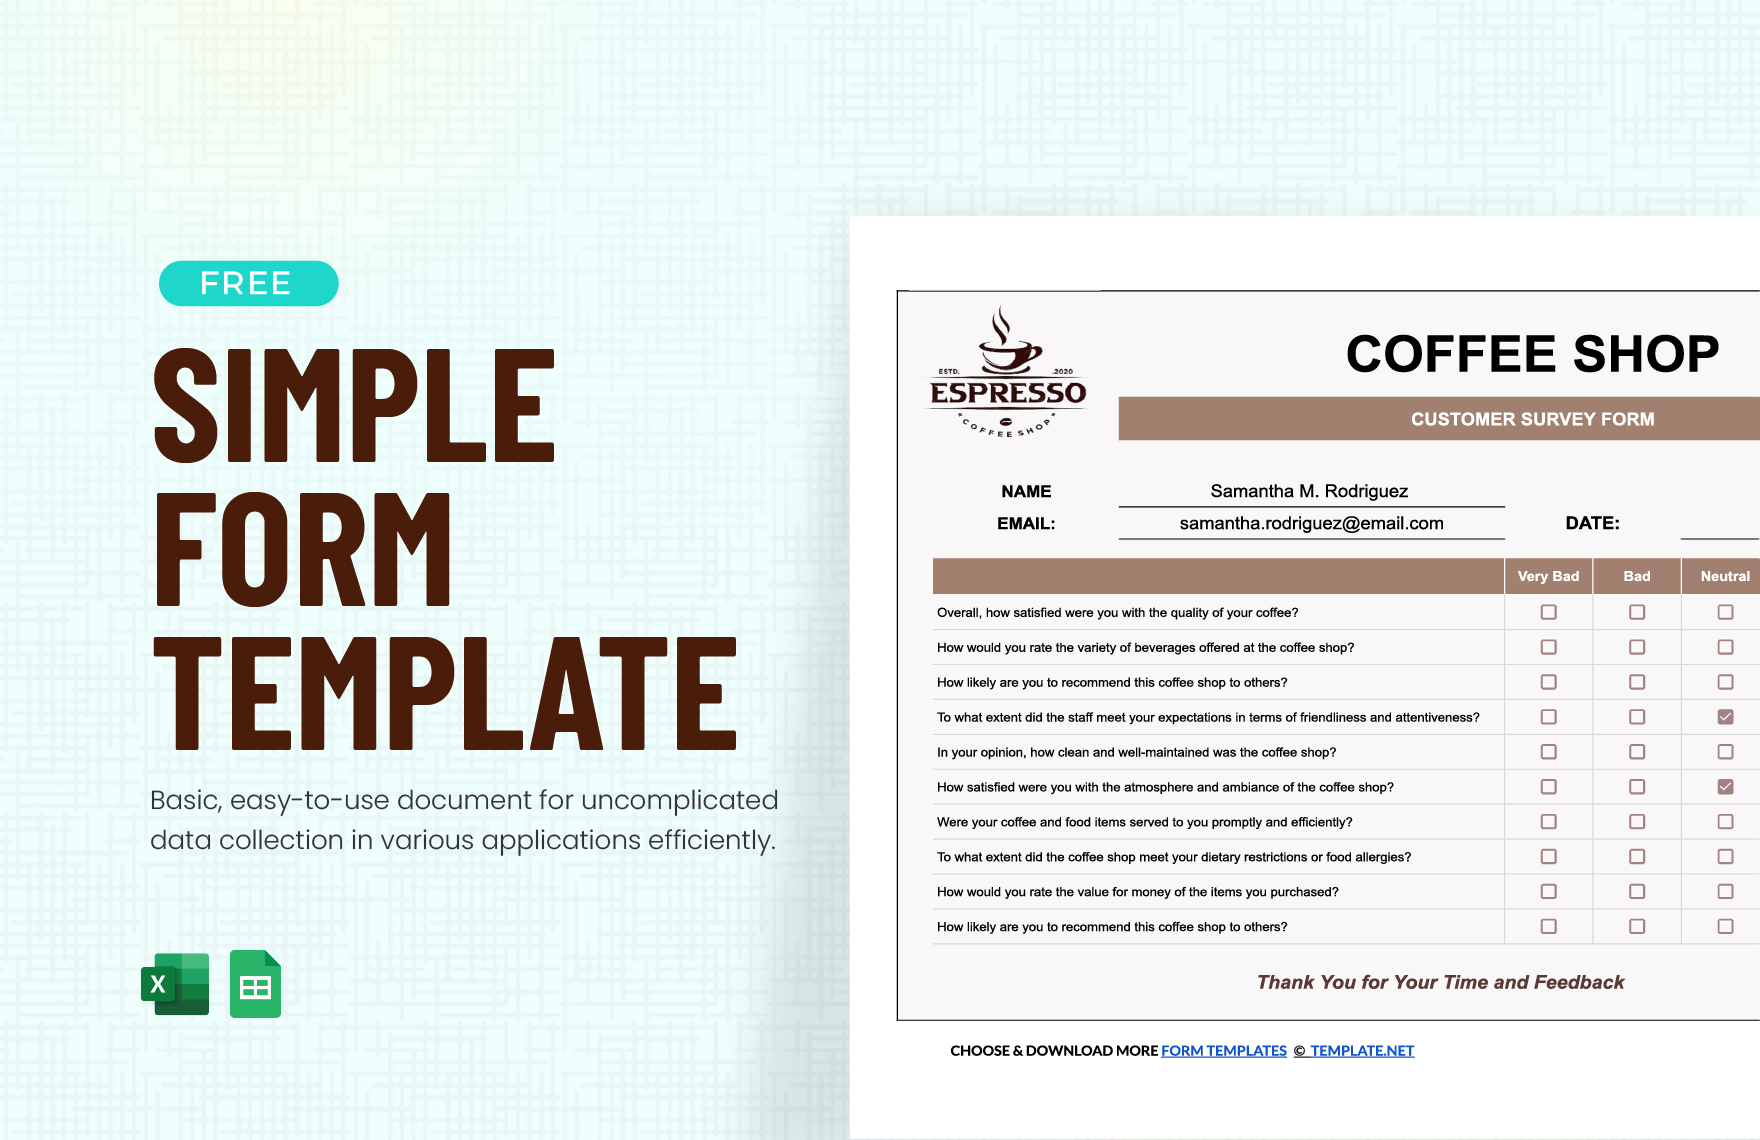 Simple Form Template